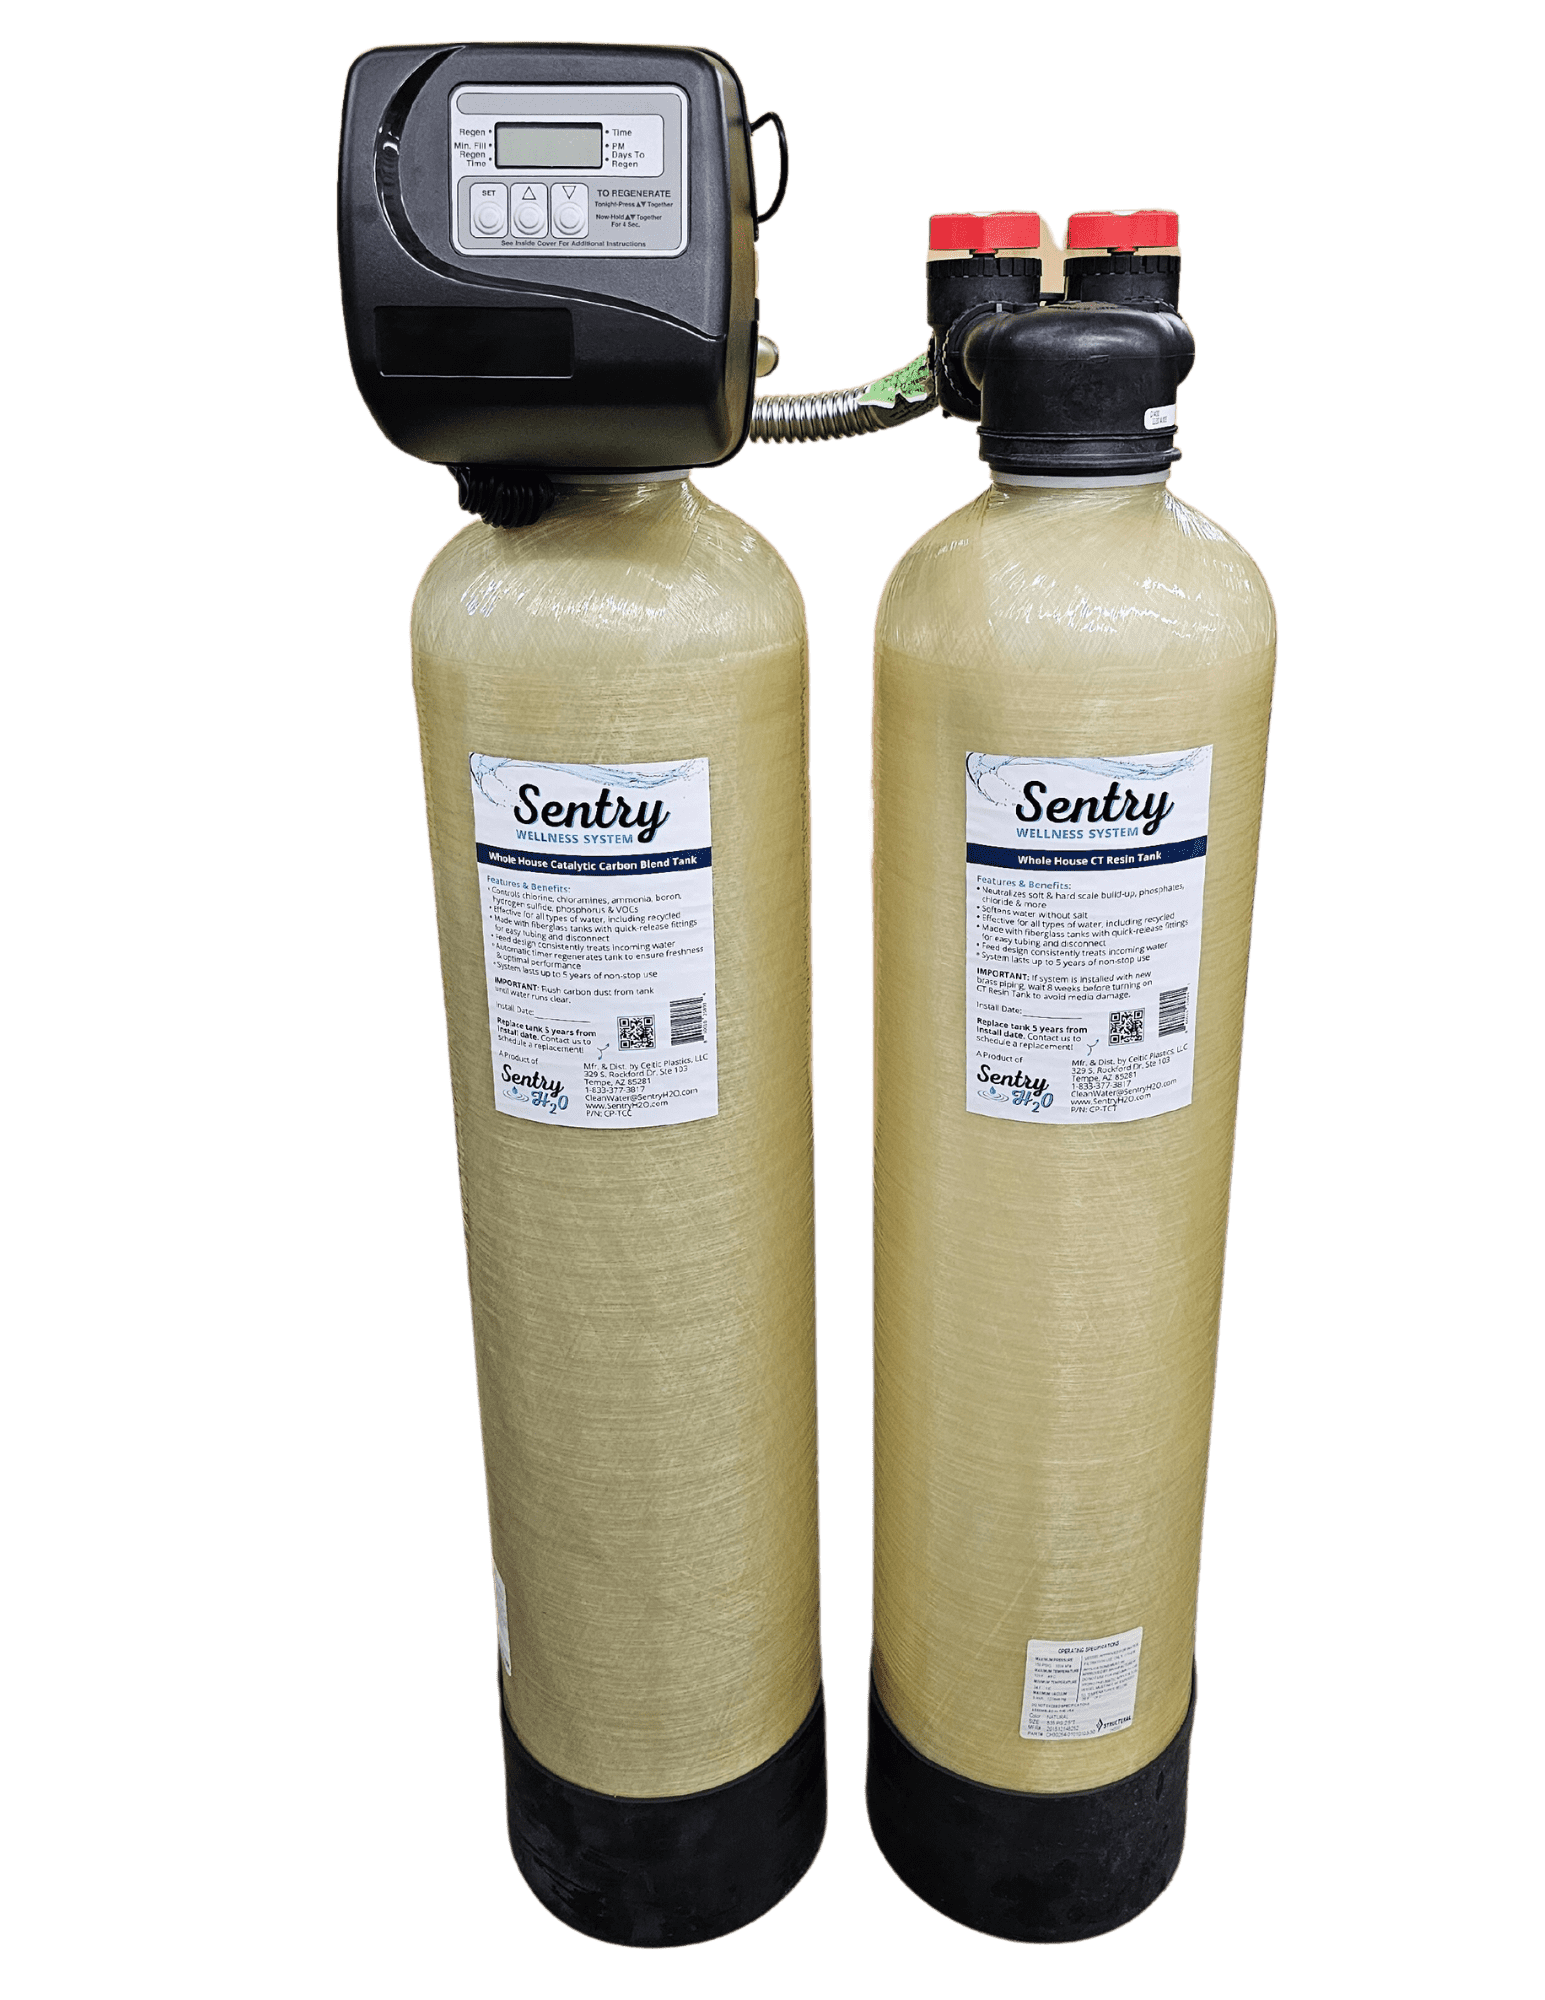 Standard size Sentry whole house water filtration